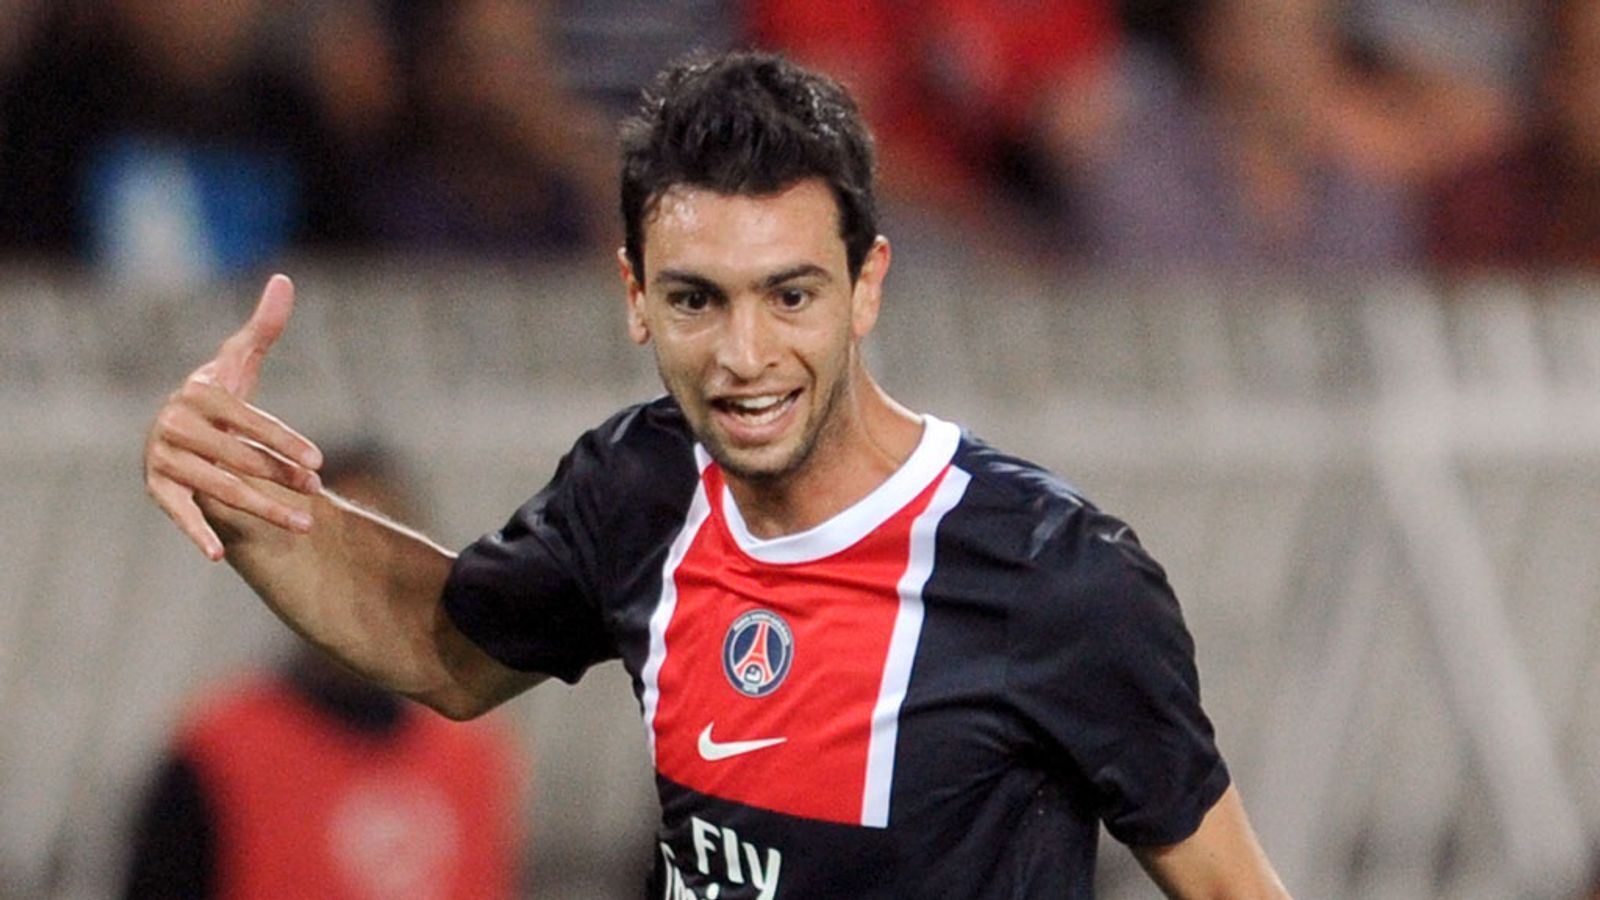 Pastore Says That He Has Grown a Lot despite Not Being No. 1